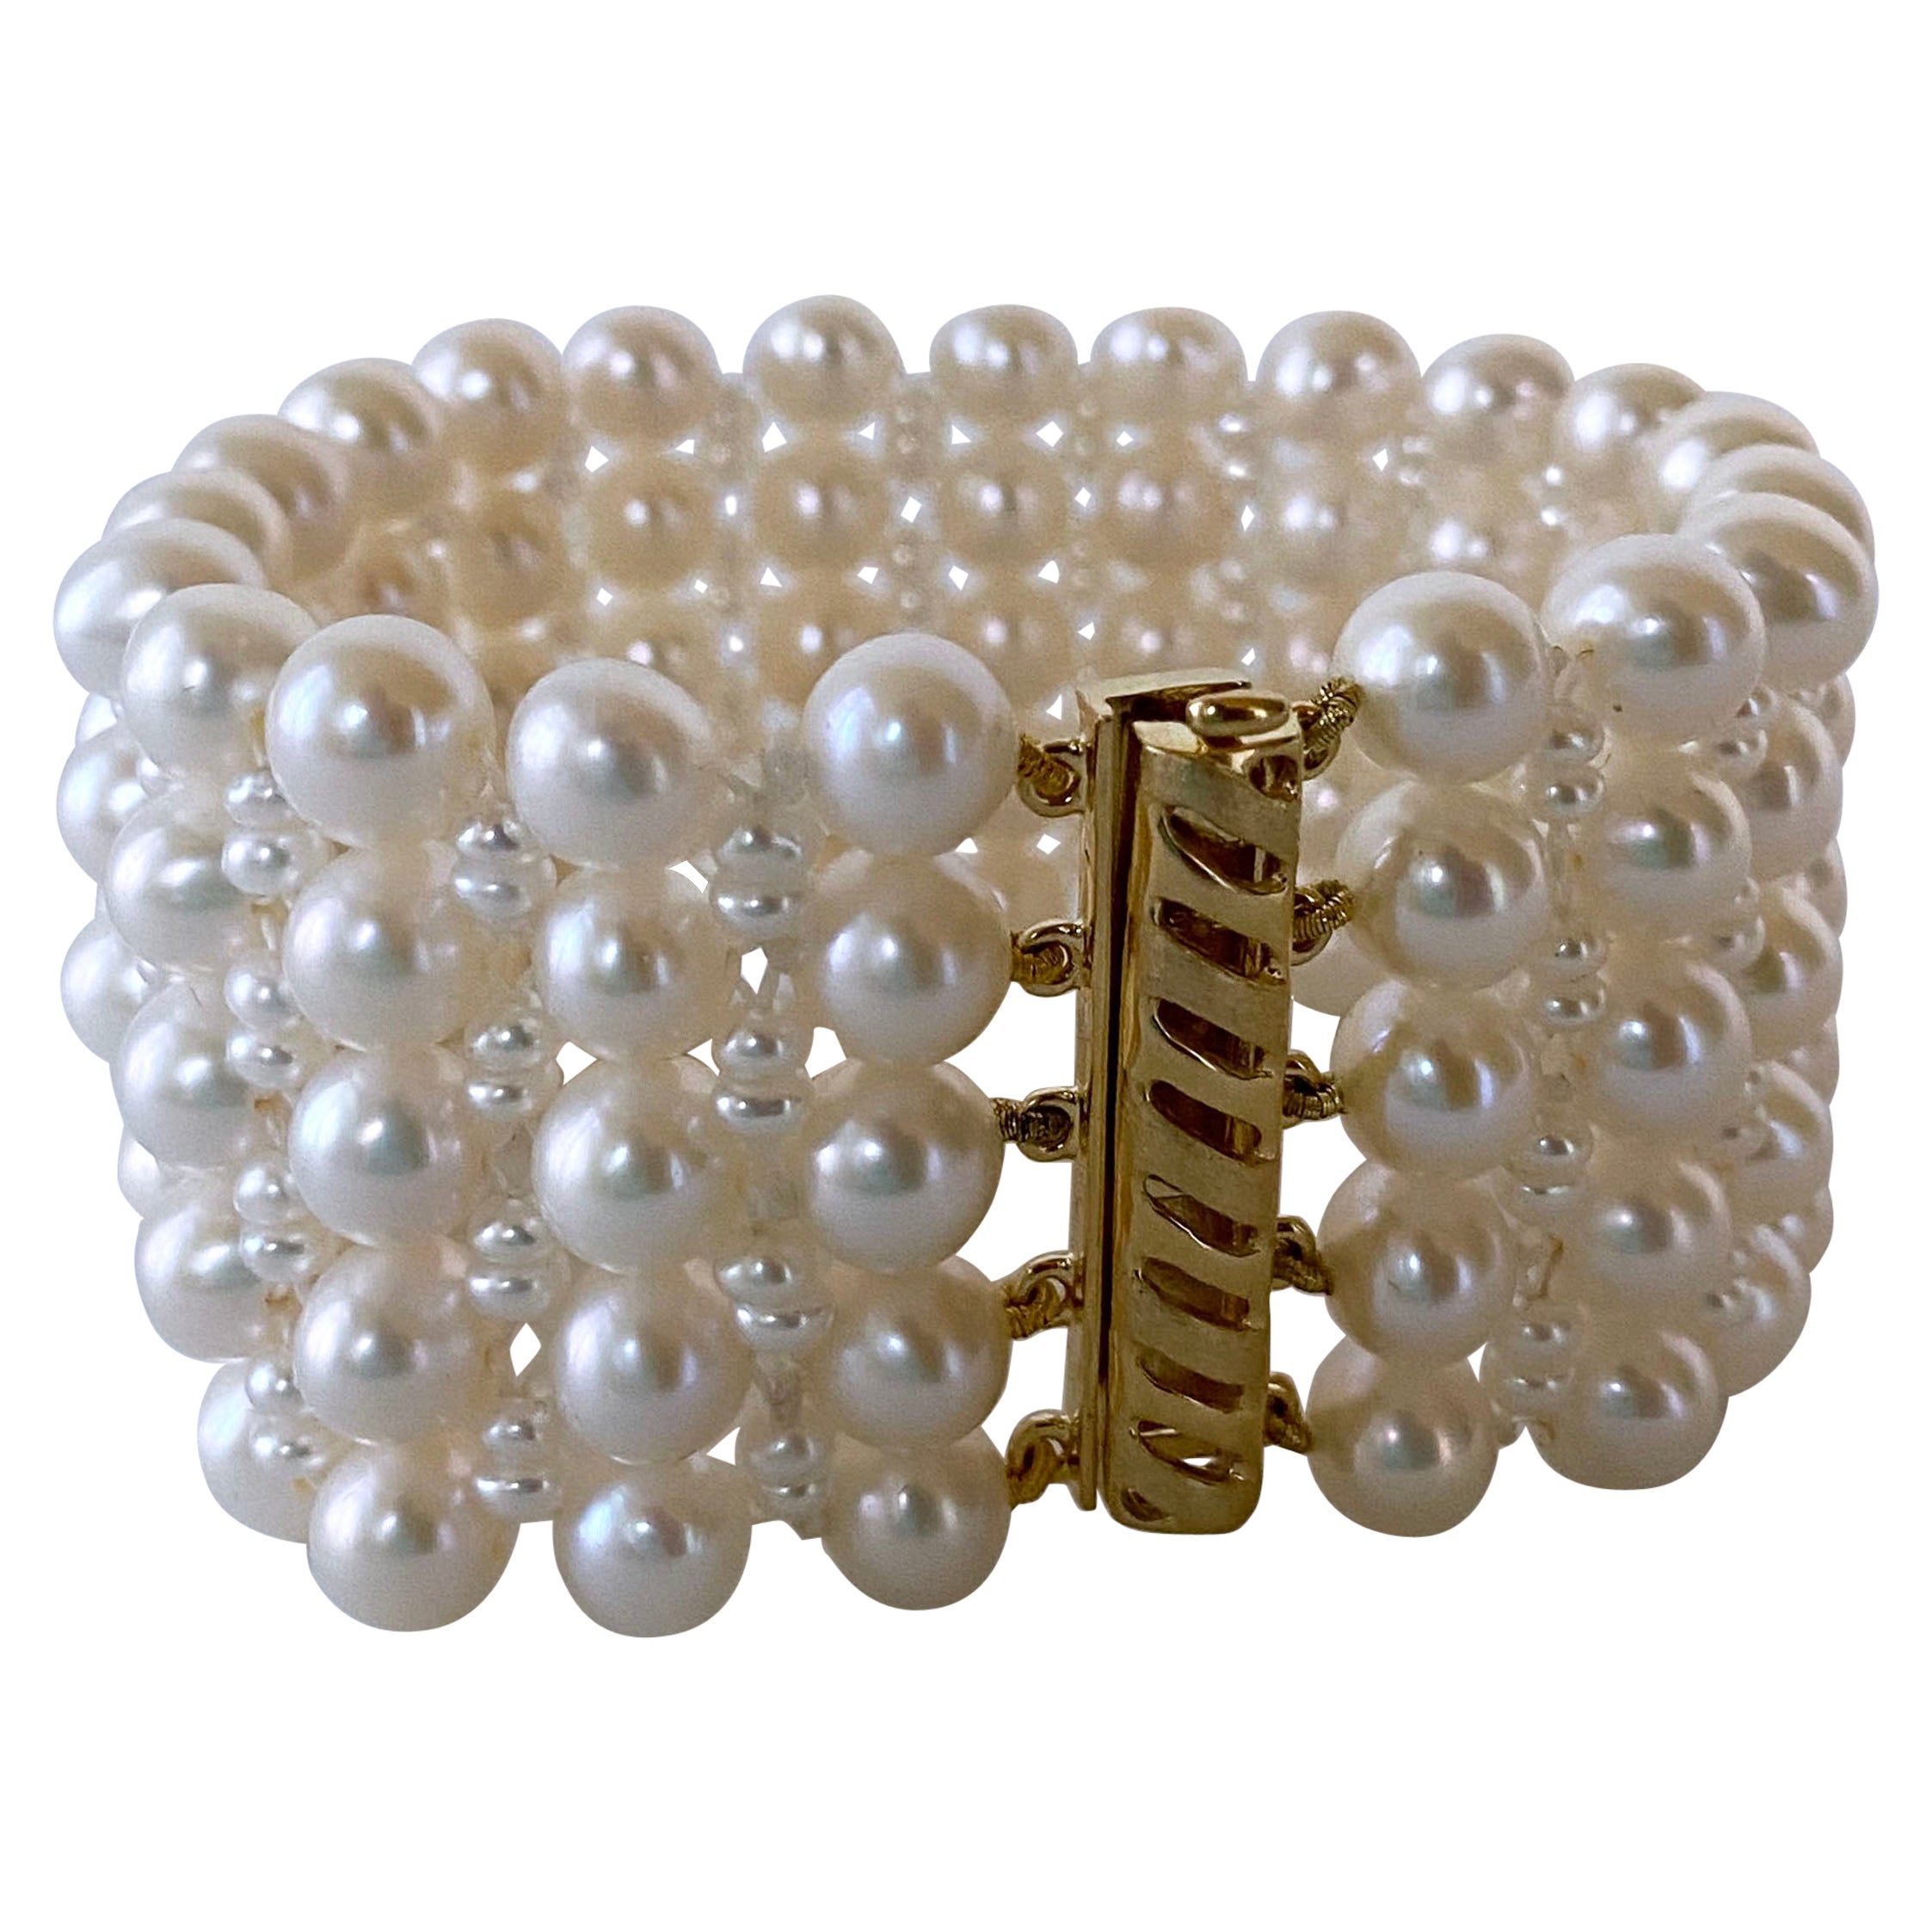 Marina J. Woven Pearl Bracelet with 14k Yellow Gold Plated Silver Sliding Clasp For Sale